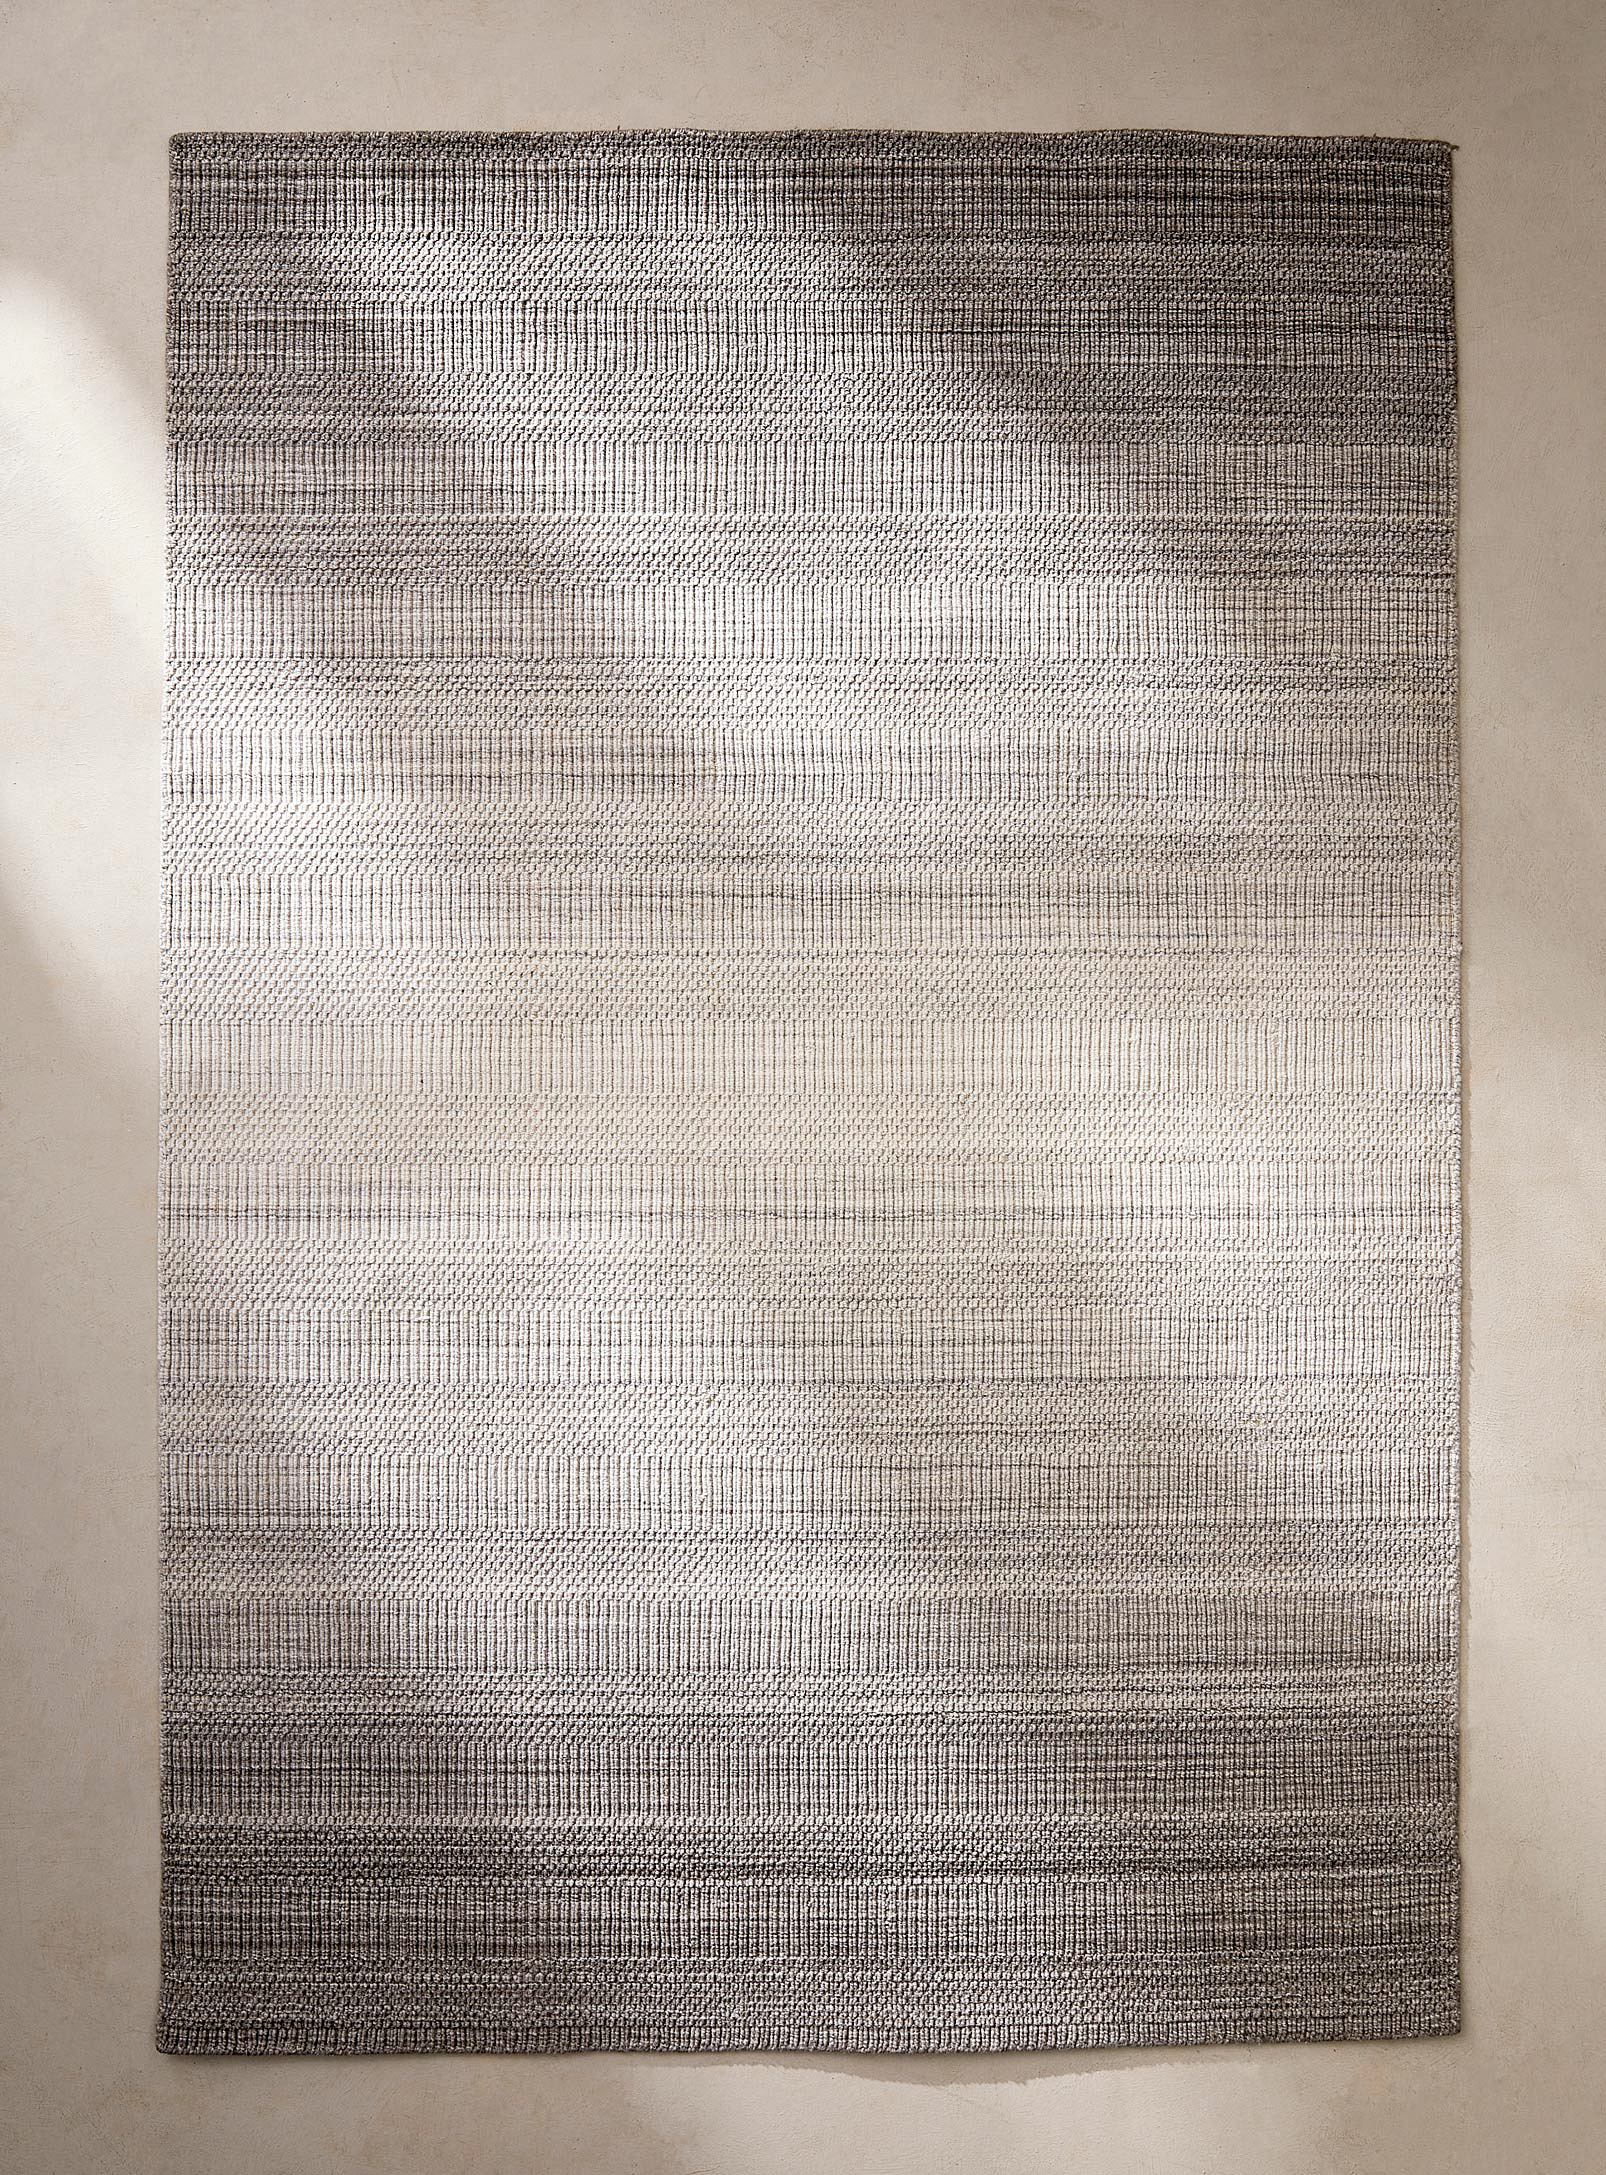 Simons Maison Recycled Polyester Variegated Artisanal Rug See Available Sizes